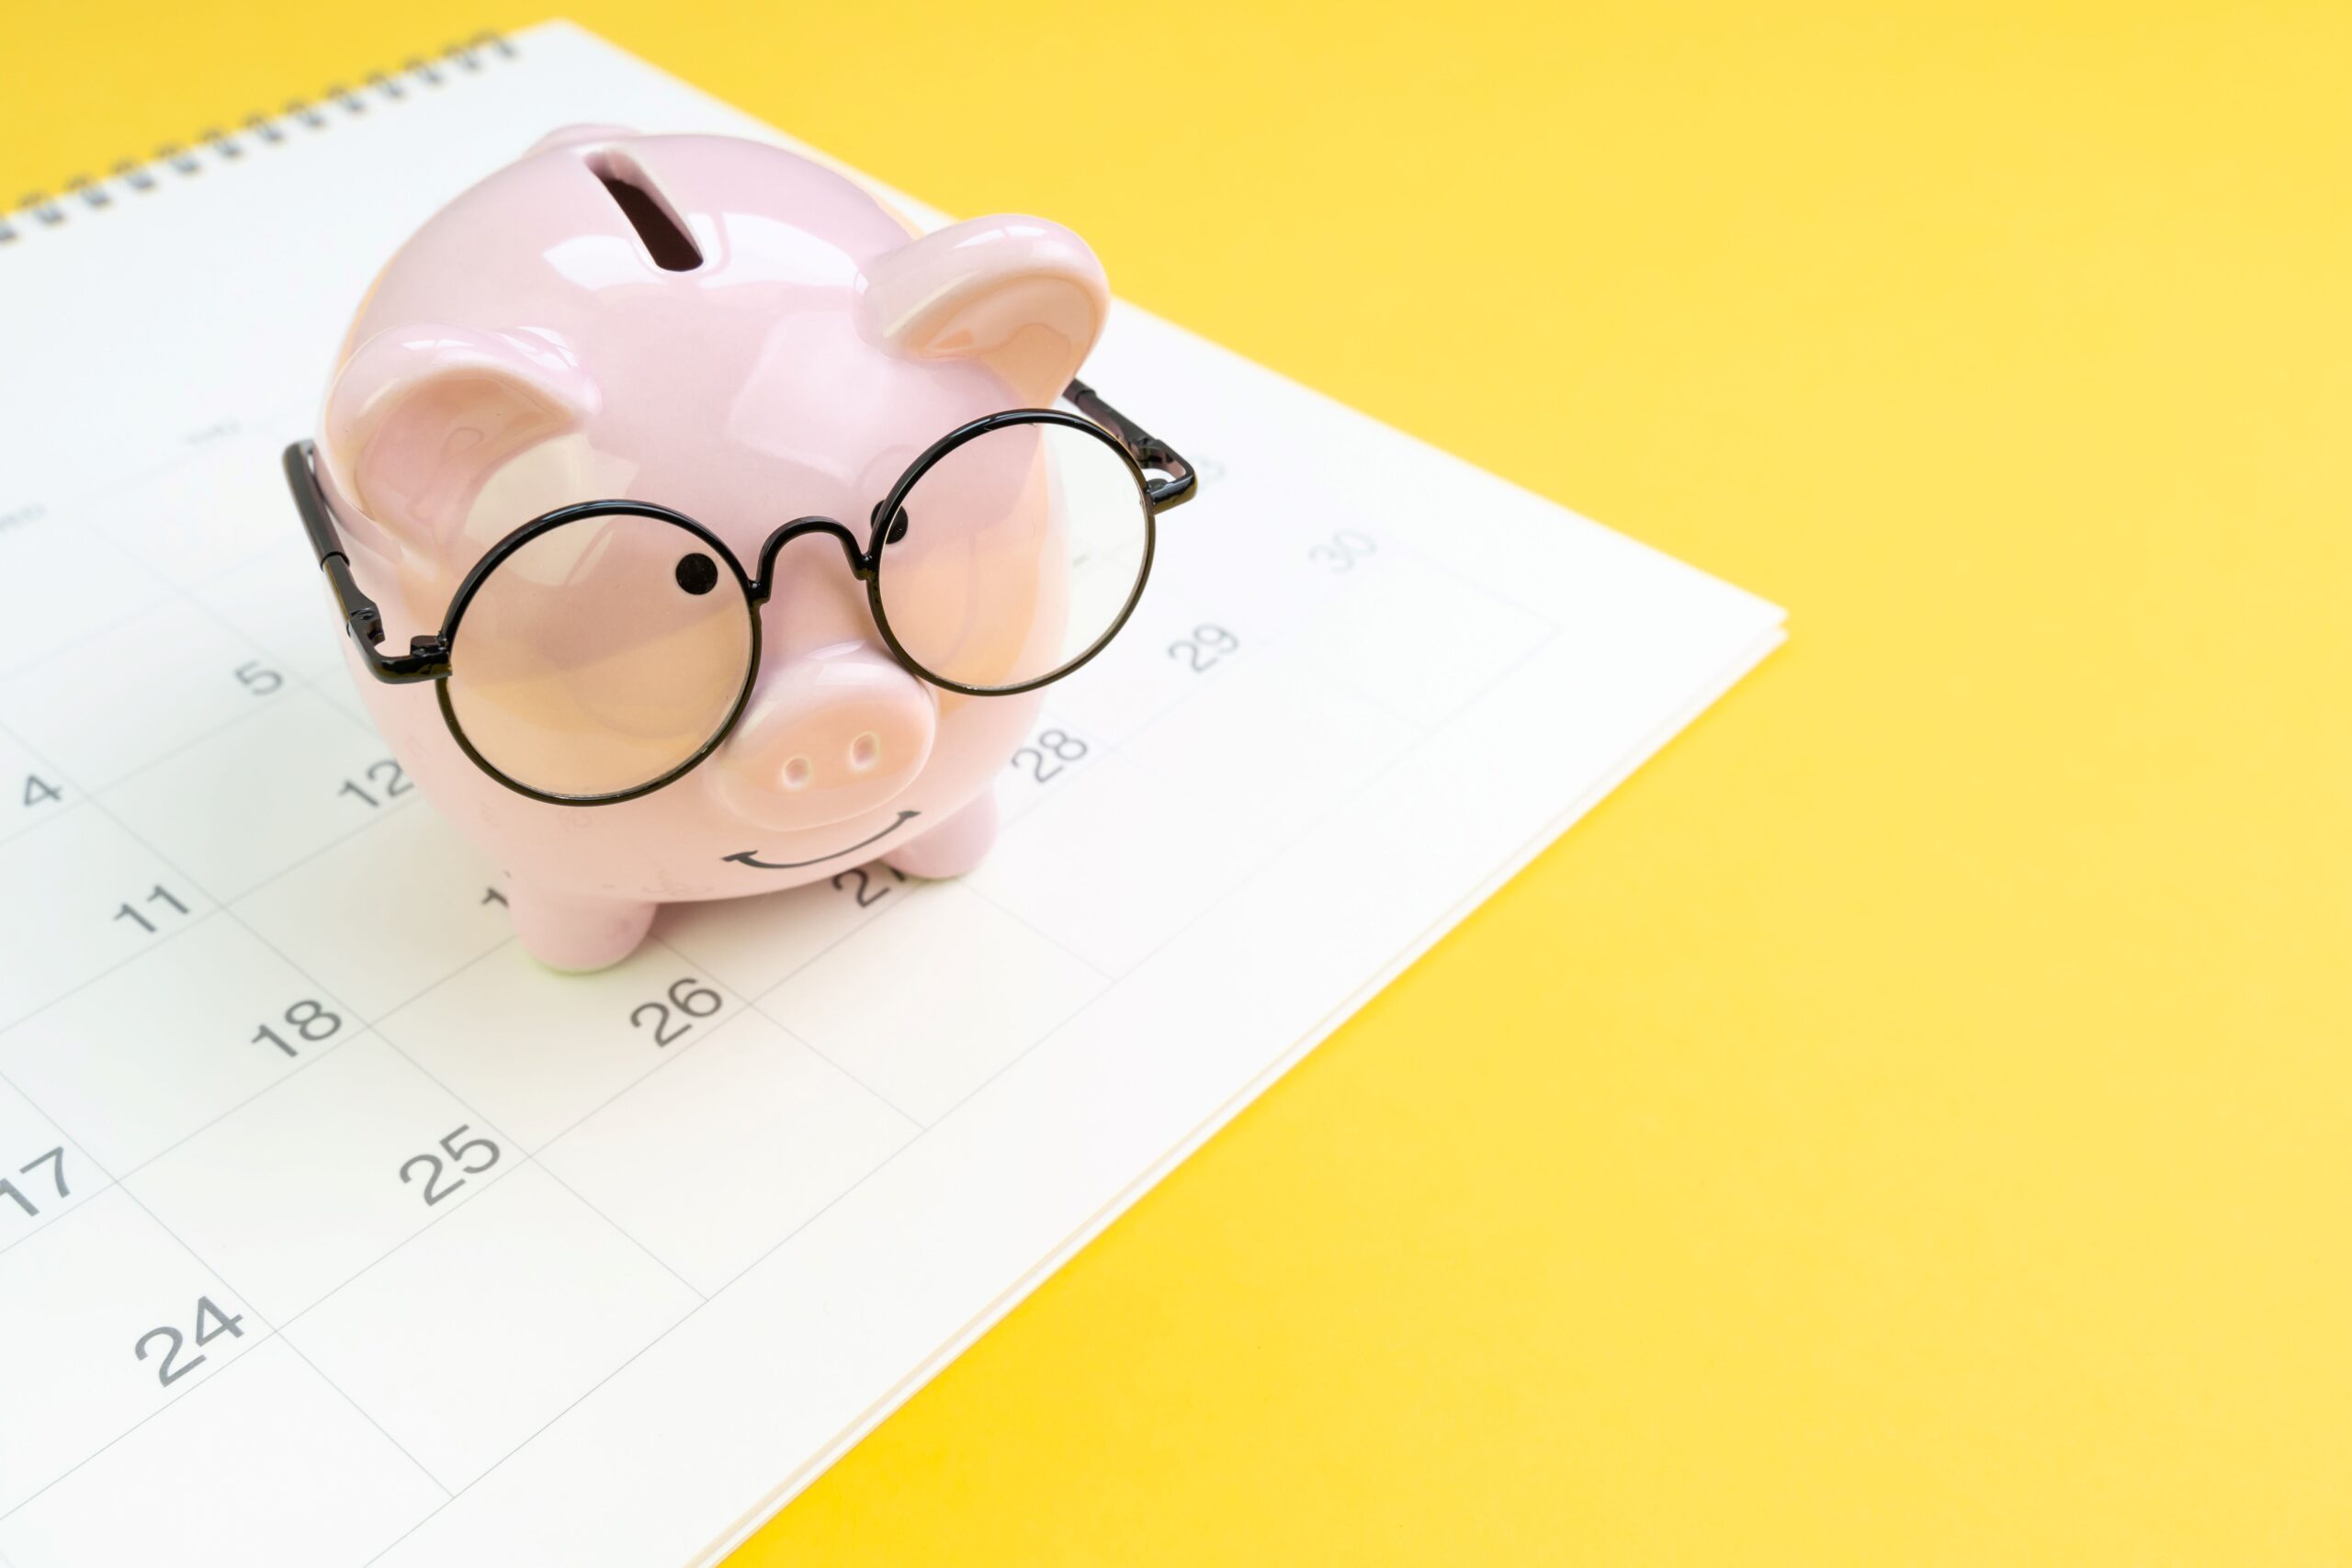 A piggy bank with glasses on sits on top of a calendar. 